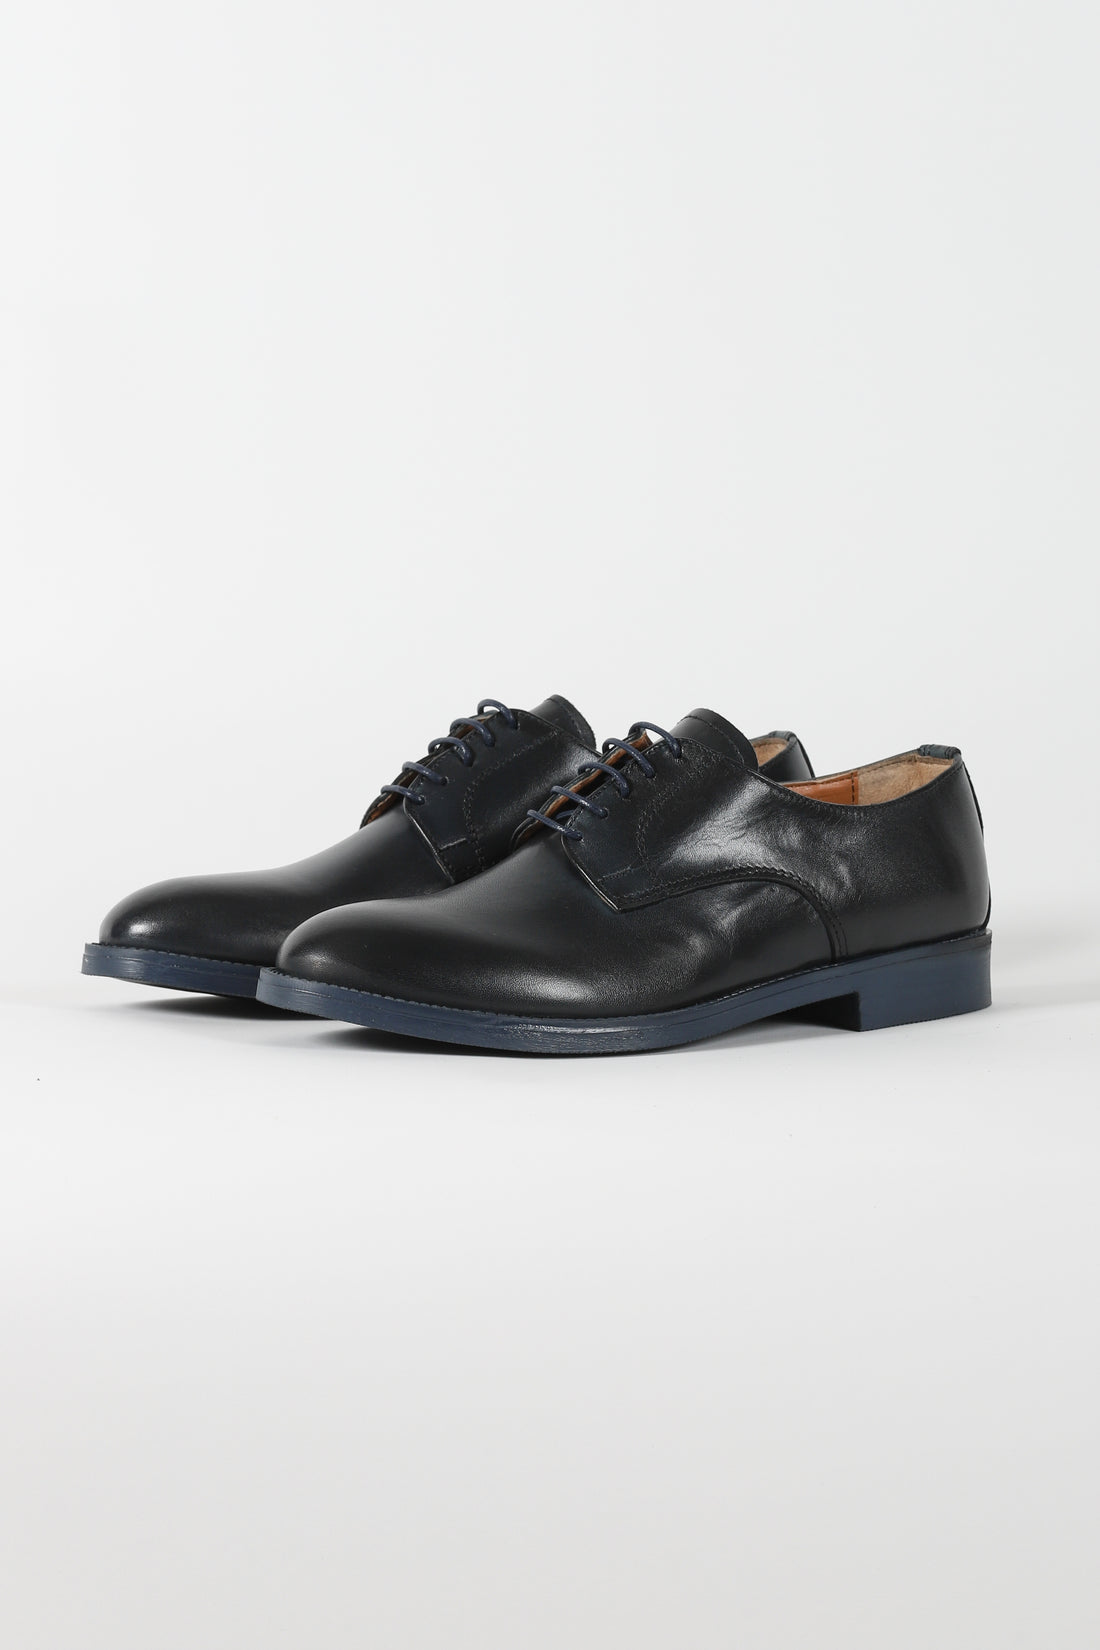 Blue lace-up shoe with rubber sole